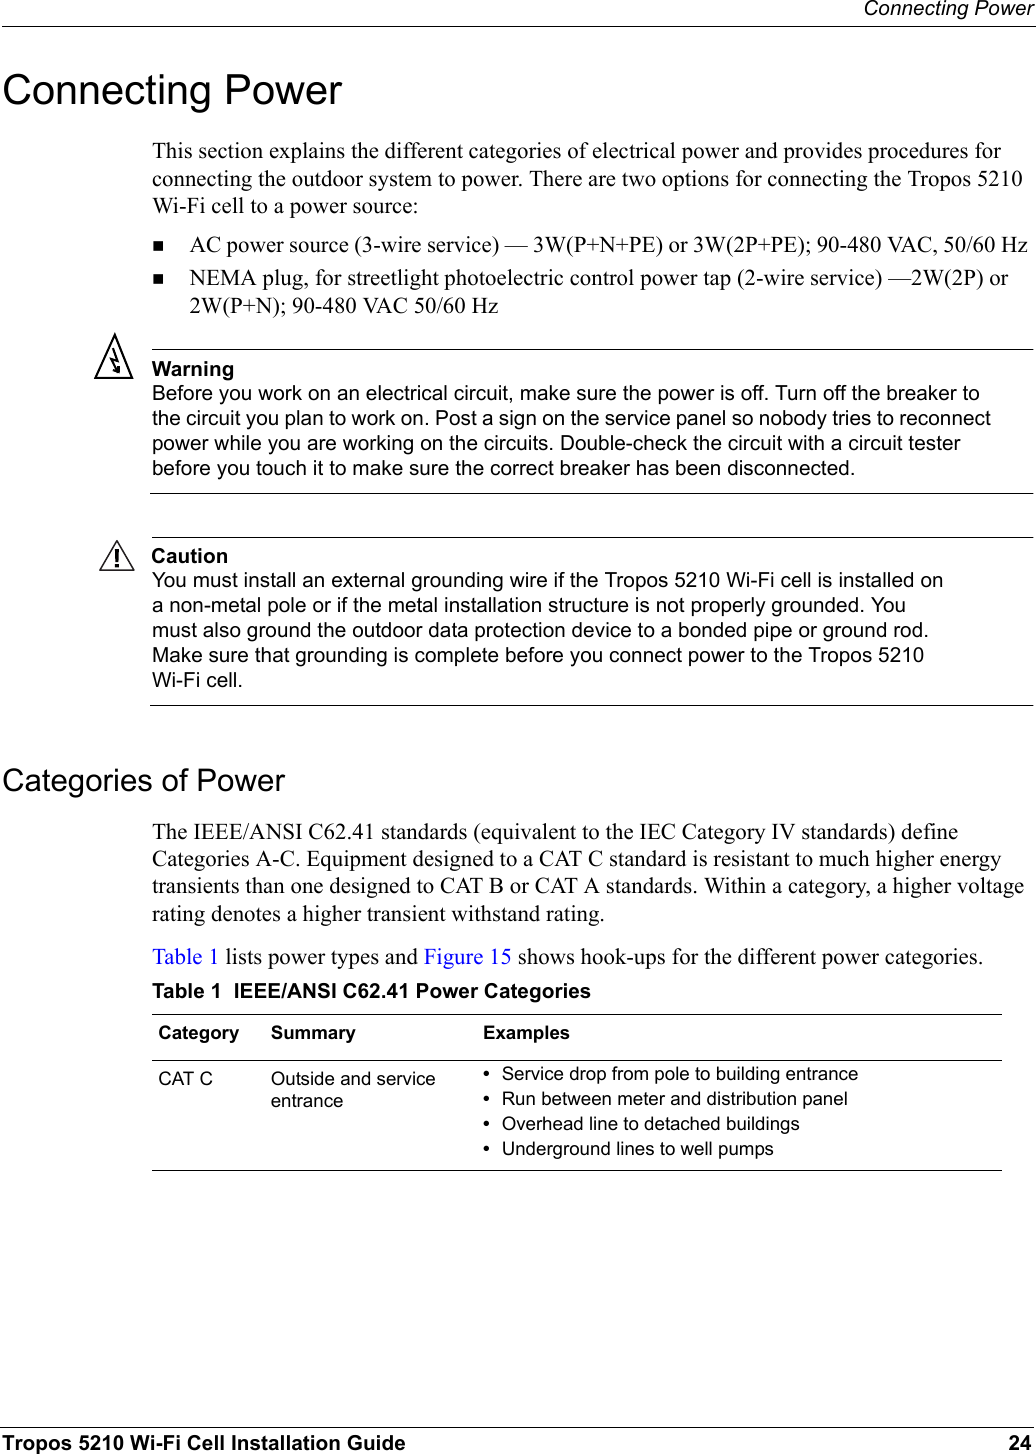 Connecting PowerTropos 5210 Wi-Fi Cell Installation Guide 24Connecting PowerThis section explains the different categories of electrical power and provides procedures for connecting the outdoor system to power. There are two options for connecting the Tropos 5210 Wi-Fi cell to a power source: AC power source (3-wire service) — 3W(P+N+PE) or 3W(2P+PE); 90-480 VAC, 50/60 Hz NEMA plug, for streetlight photoelectric control power tap (2-wire service) —2W(2P) or 2W(P+N); 90-480 VAC 50/60 HzWarningBefore you work on an electrical circuit, make sure the power is off. Turn off the breaker to the circuit you plan to work on. Post a sign on the service panel so nobody tries to reconnect power while you are working on the circuits. Double-check the circuit with a circuit tester before you touch it to make sure the correct breaker has been disconnected. CautionYou must install an external grounding wire if the Tropos 5210 Wi-Fi cell is installed on a non-metal pole or if the metal installation structure is not properly grounded. You must also ground the outdoor data protection device to a bonded pipe or ground rod. Make sure that grounding is complete before you connect power to the Tropos 5210 Wi-Fi cell.Categories of PowerThe IEEE/ANSI C62.41 standards (equivalent to the IEC Category IV standards) define Categories A-C. Equipment designed to a CAT C standard is resistant to much higher energy transients than one designed to CAT B or CAT A standards. Within a category, a higher voltage rating denotes a higher transient withstand rating.Table 1 lists power types and Figure 15 shows hook-ups for the different power categories.Table 1  IEEE/ANSI C62.41 Power CategoriesCategory Summary ExamplesCAT C Outside and service entrance•Service drop from pole to building entrance•Run between meter and distribution panel•Overhead line to detached buildings•Underground lines to well pumps